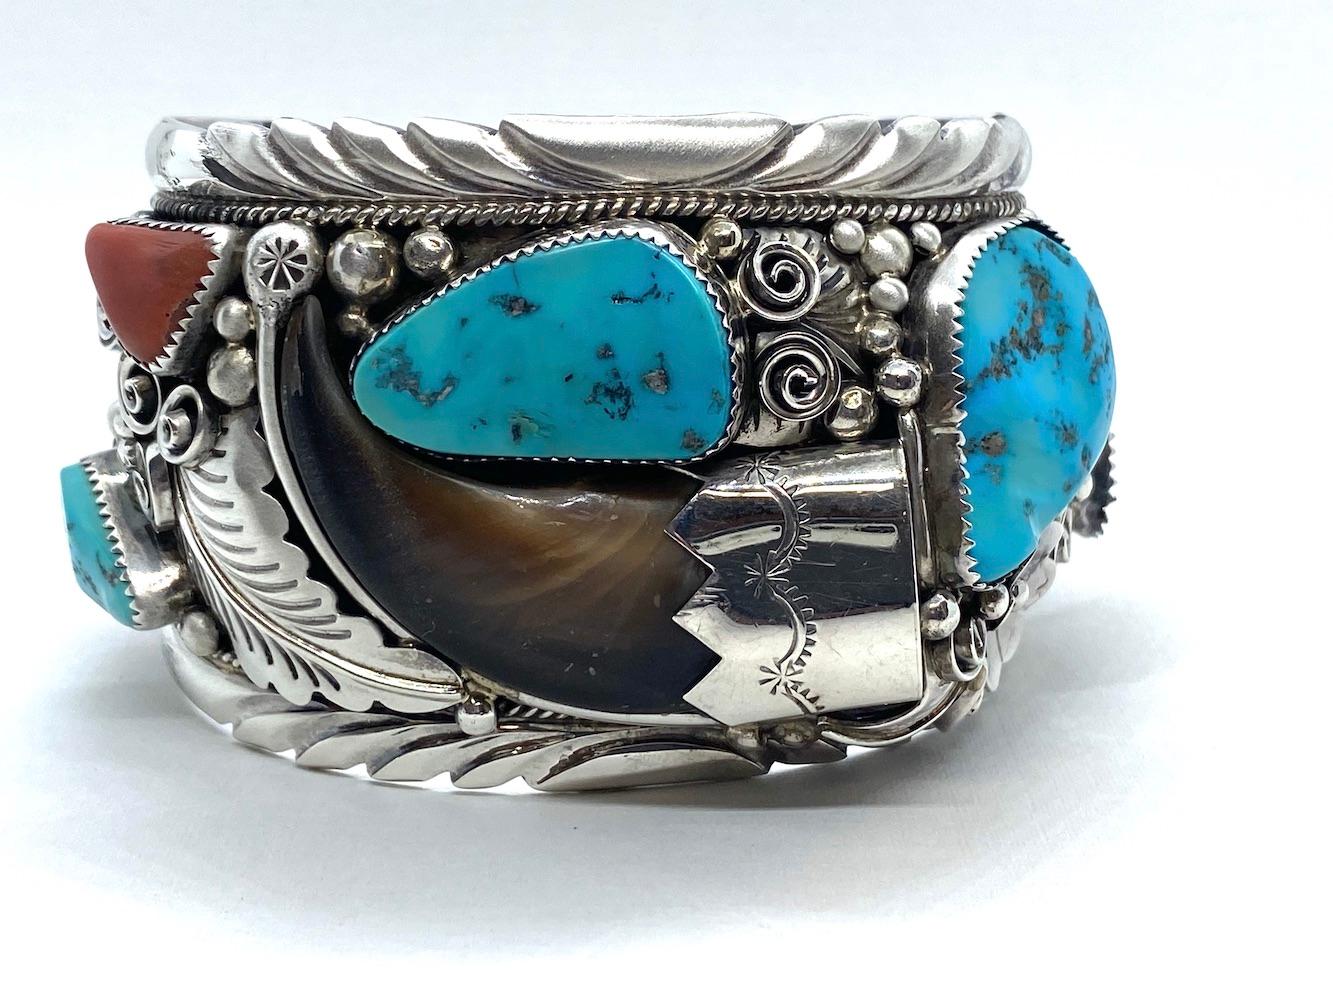 Anglo-Indian JW Toadlena Native American Bear Cuff Bracelet with Turquoise and Coral 4.12 Oz